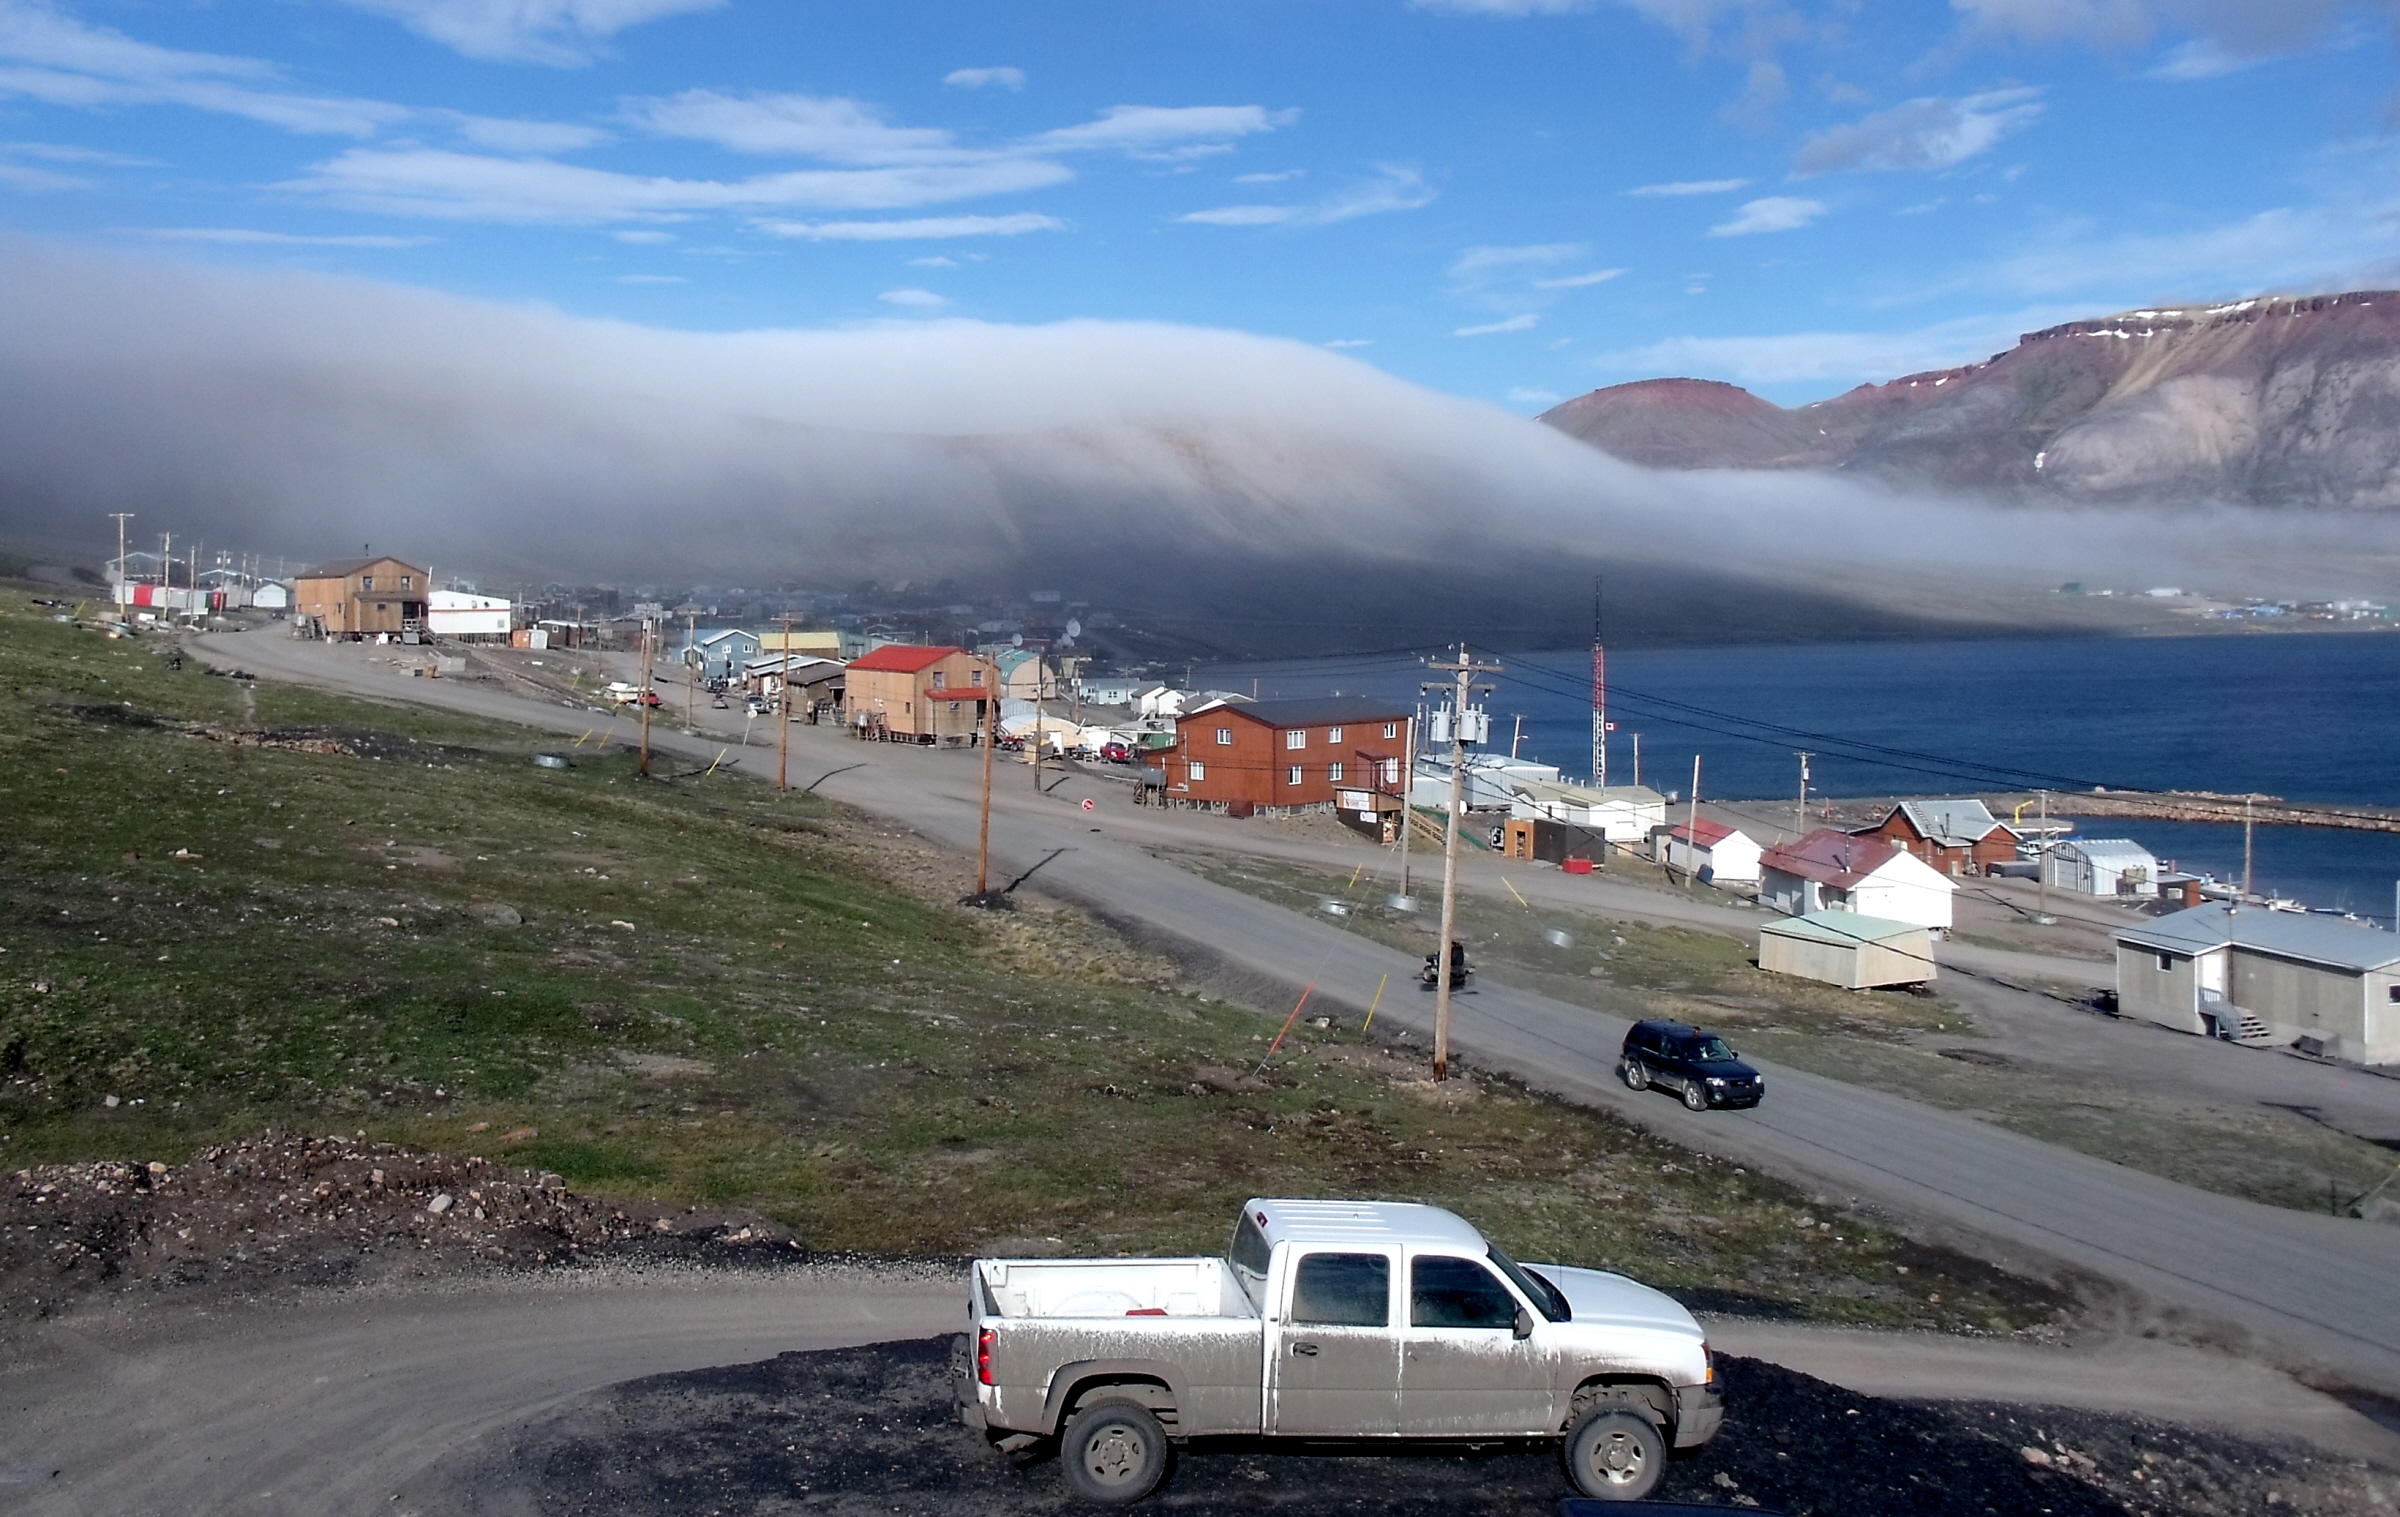  The fog rolling over hills in Nunavut By  Mike Beauregard   